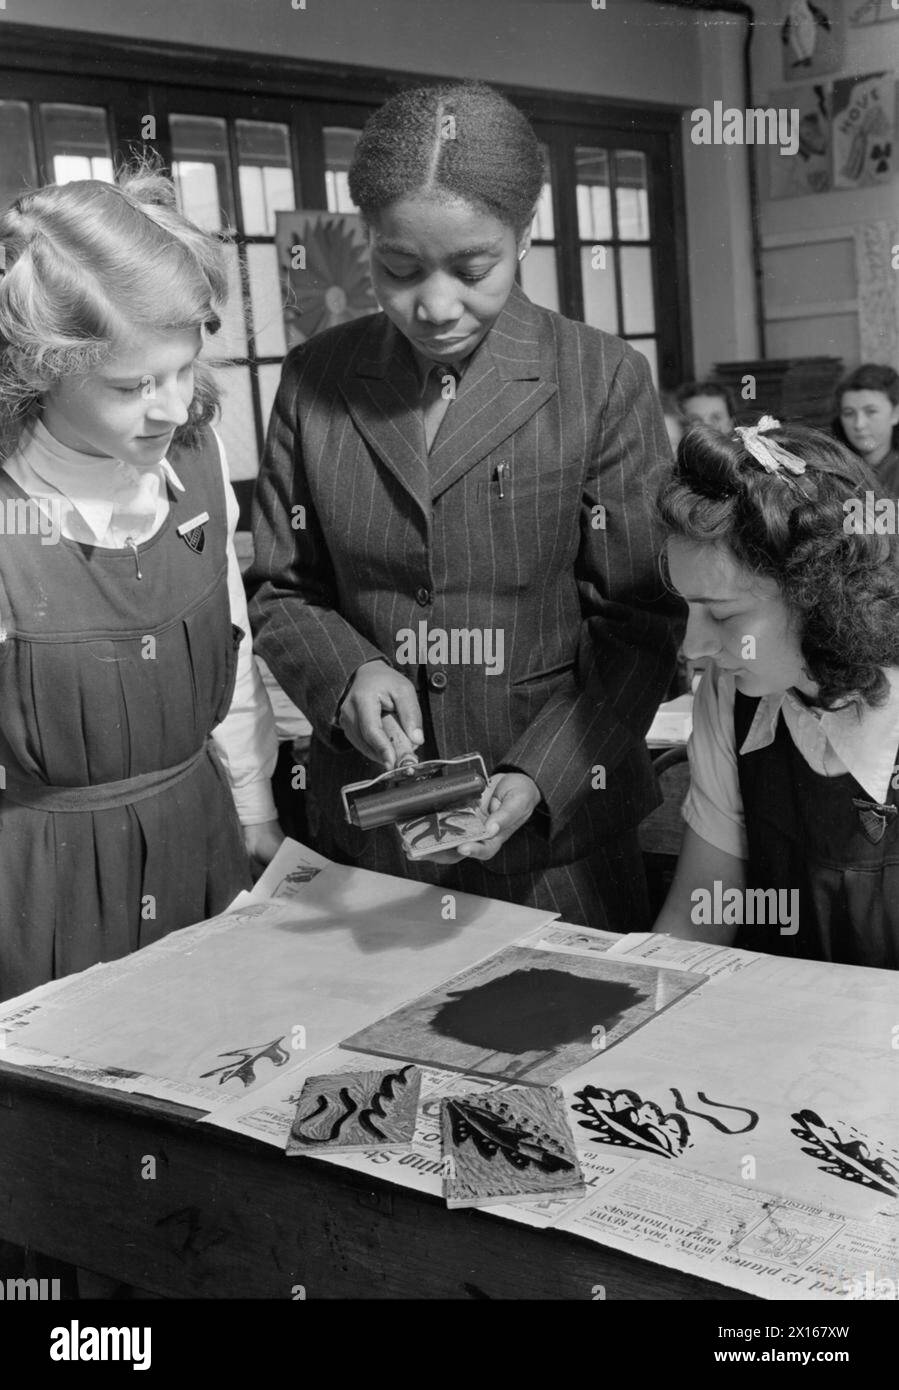 COLONIAL STUDENTS IN GREAT BRITAIN: STUDENTS AT UNIVERSITY OF LONDON INSTITUTE OF EDUCATION, LONDON, ENGLAND, UK, 1946 - Miss Kote-Amon from Labadi, Gold Coast, demonstrates the use of lino-cuts to senior girls at the Marlborough Senior Girls School, Isleworth, West London. She is a member of the staff of Kumasi Government School and has won the Gold Coast Teachers Certificate Stock Photo